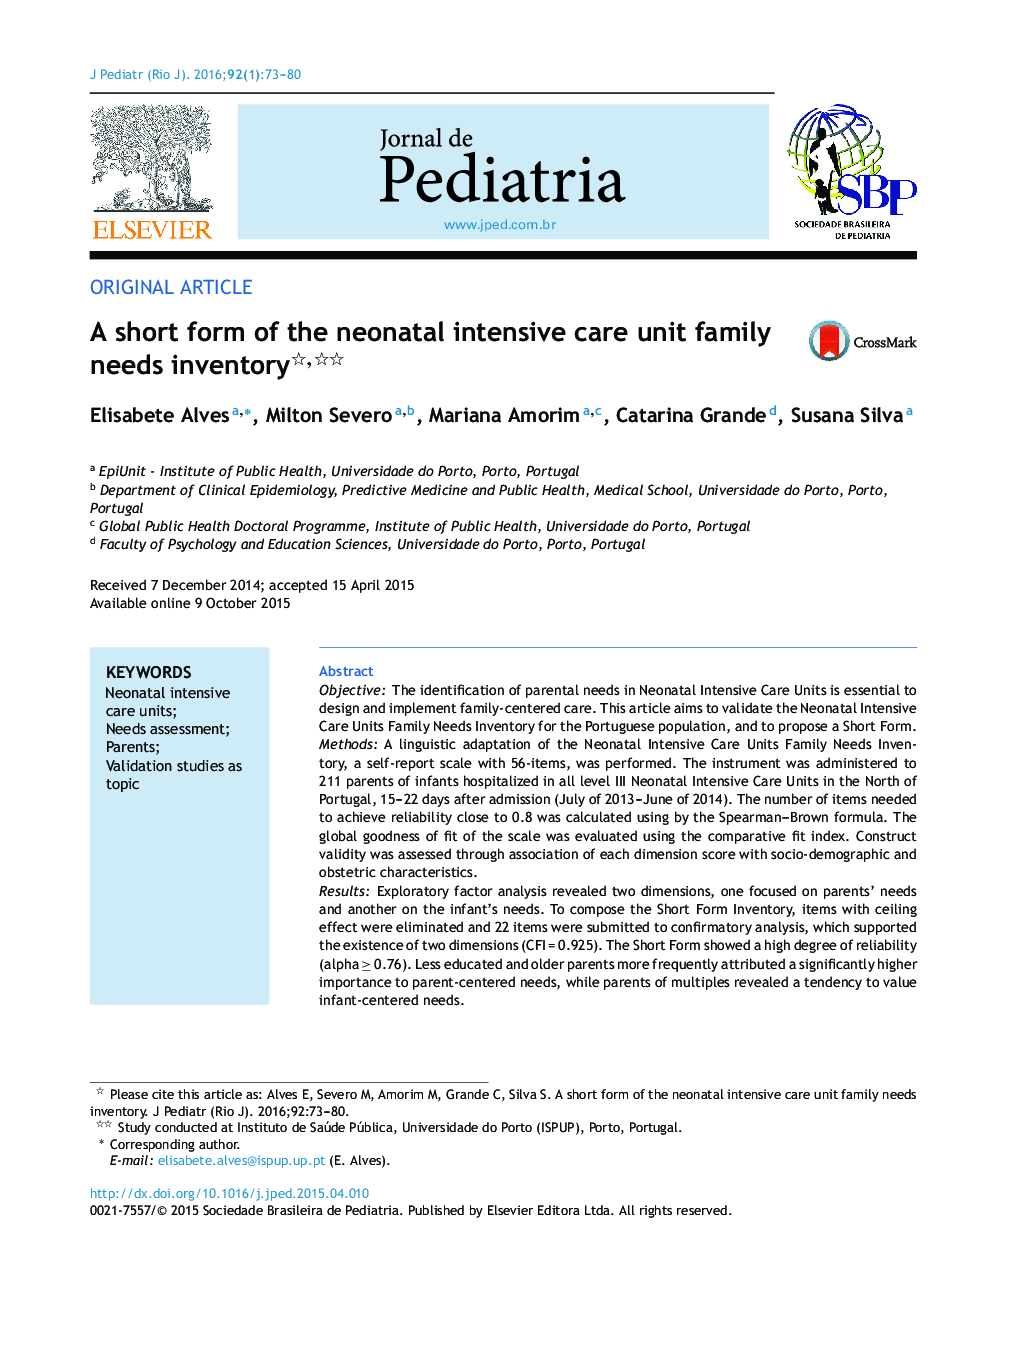 A short form of the neonatal intensive care unit family needs inventory 